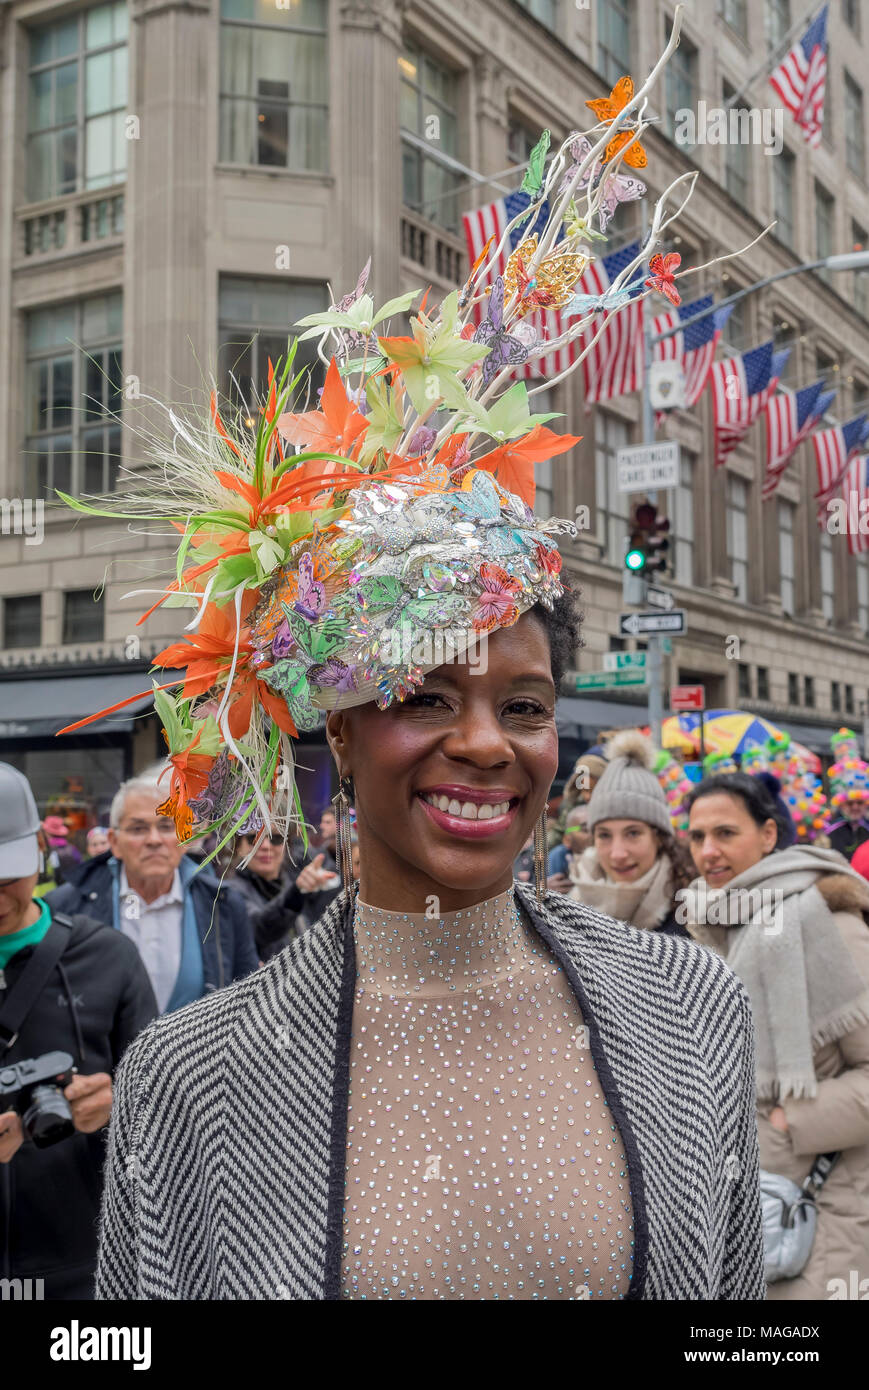 Reportage Easter parade New York City portrait Easter costume man wearing  Yakees baseball outfit and hat Stock Photo - Alamy